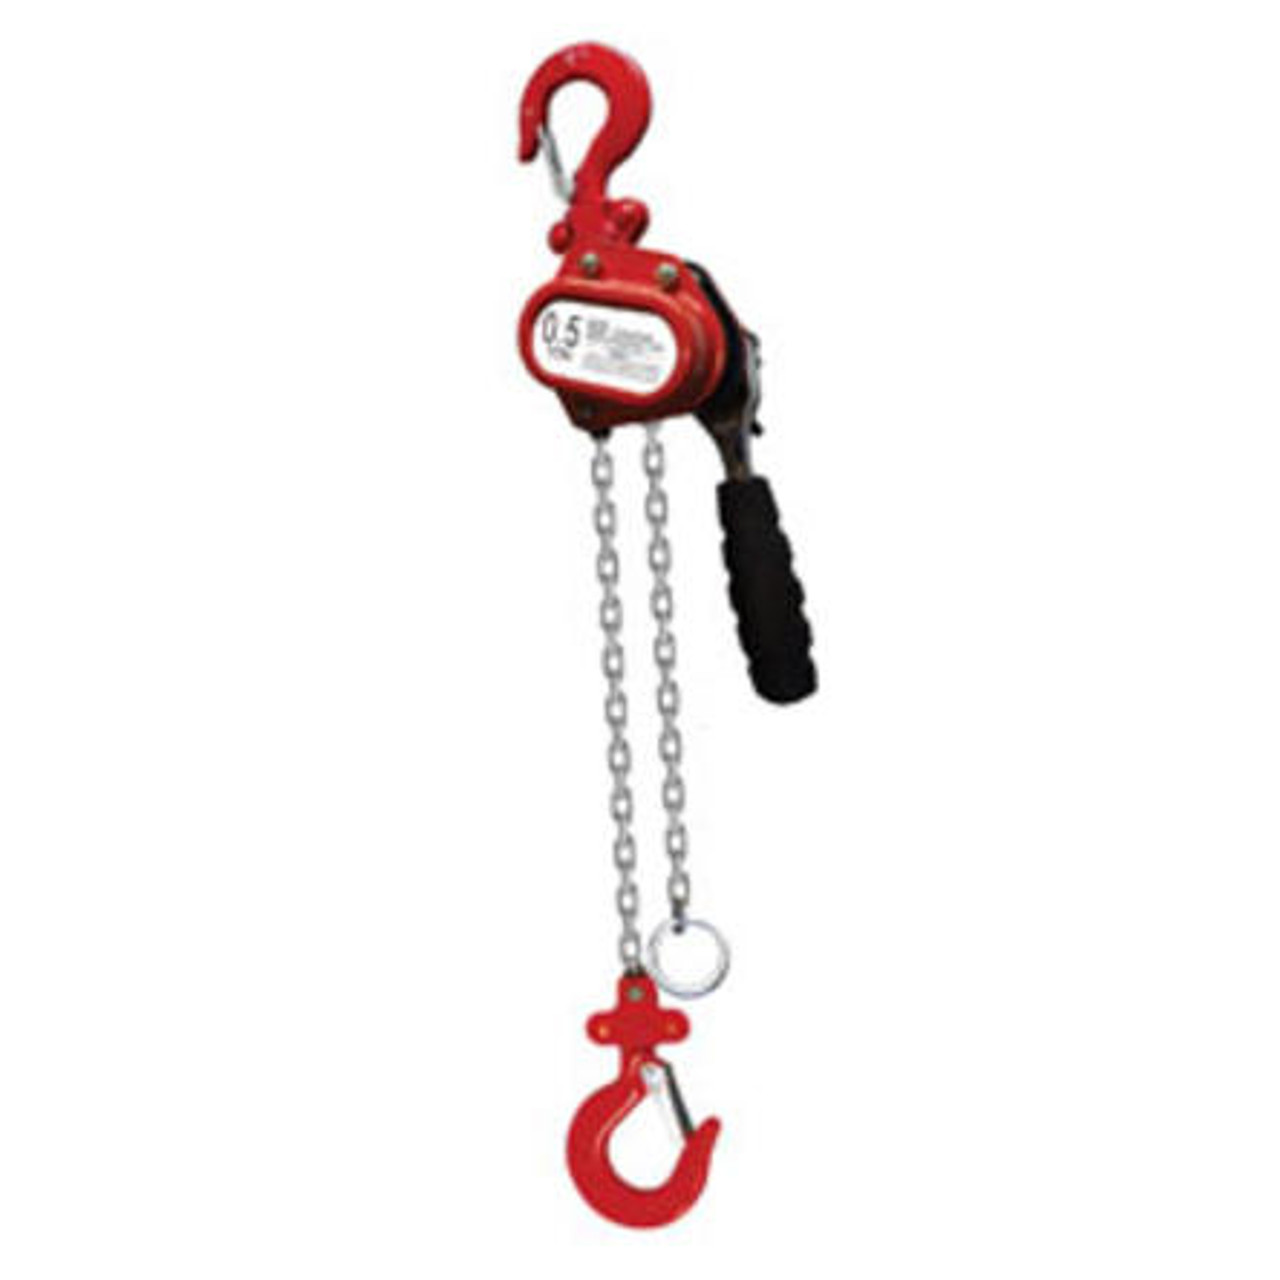 American Power Pull 603-15-0.5 Ton Chain Puller W/ 15' Lift